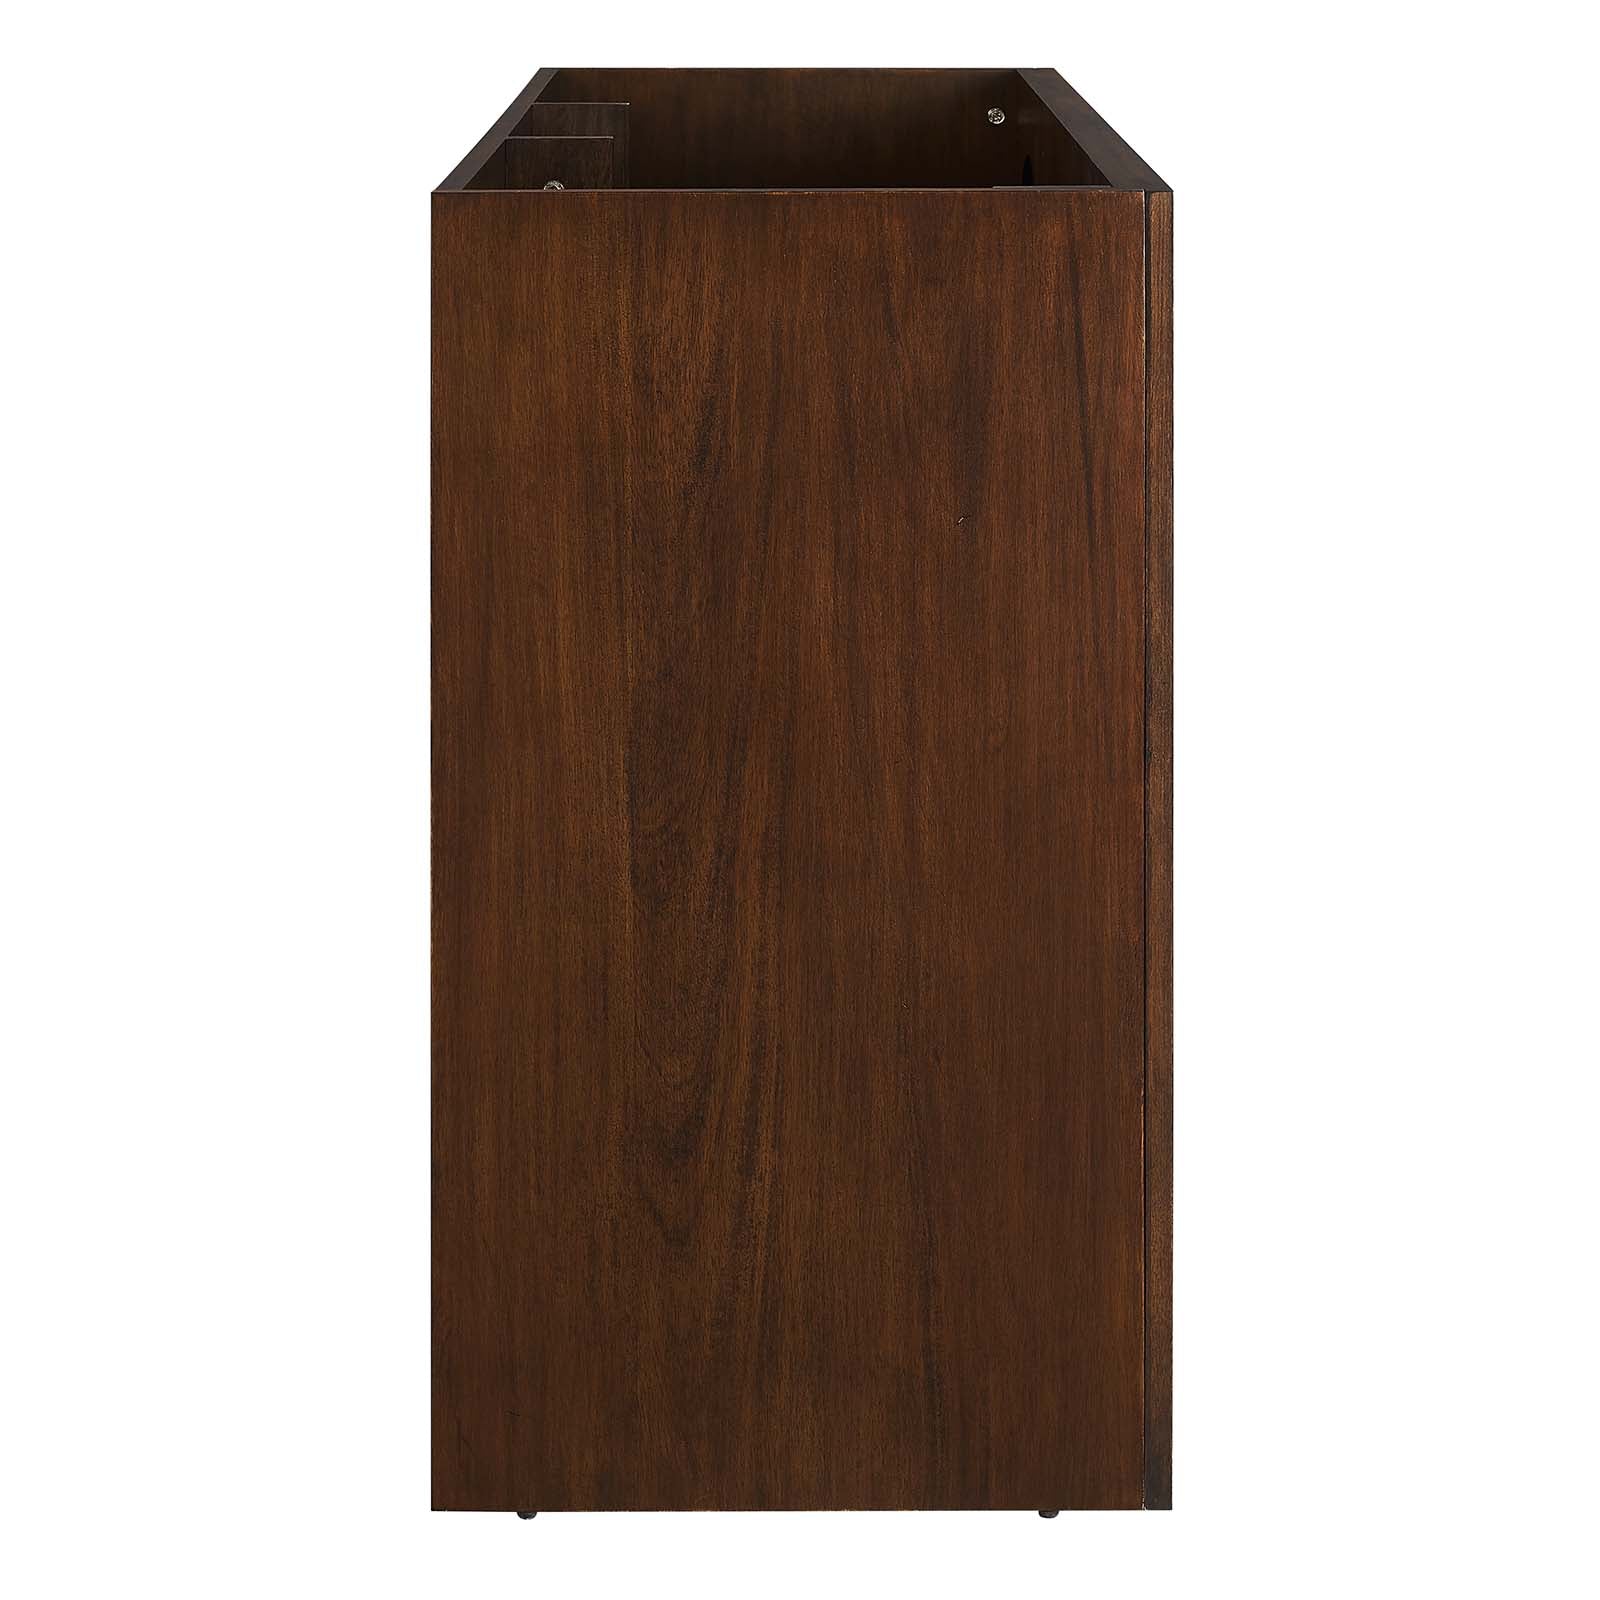 Appia 48" Bathroom Vanity Cabinet (Sink Basin Not Included) - East Shore Modern Home Furnishings